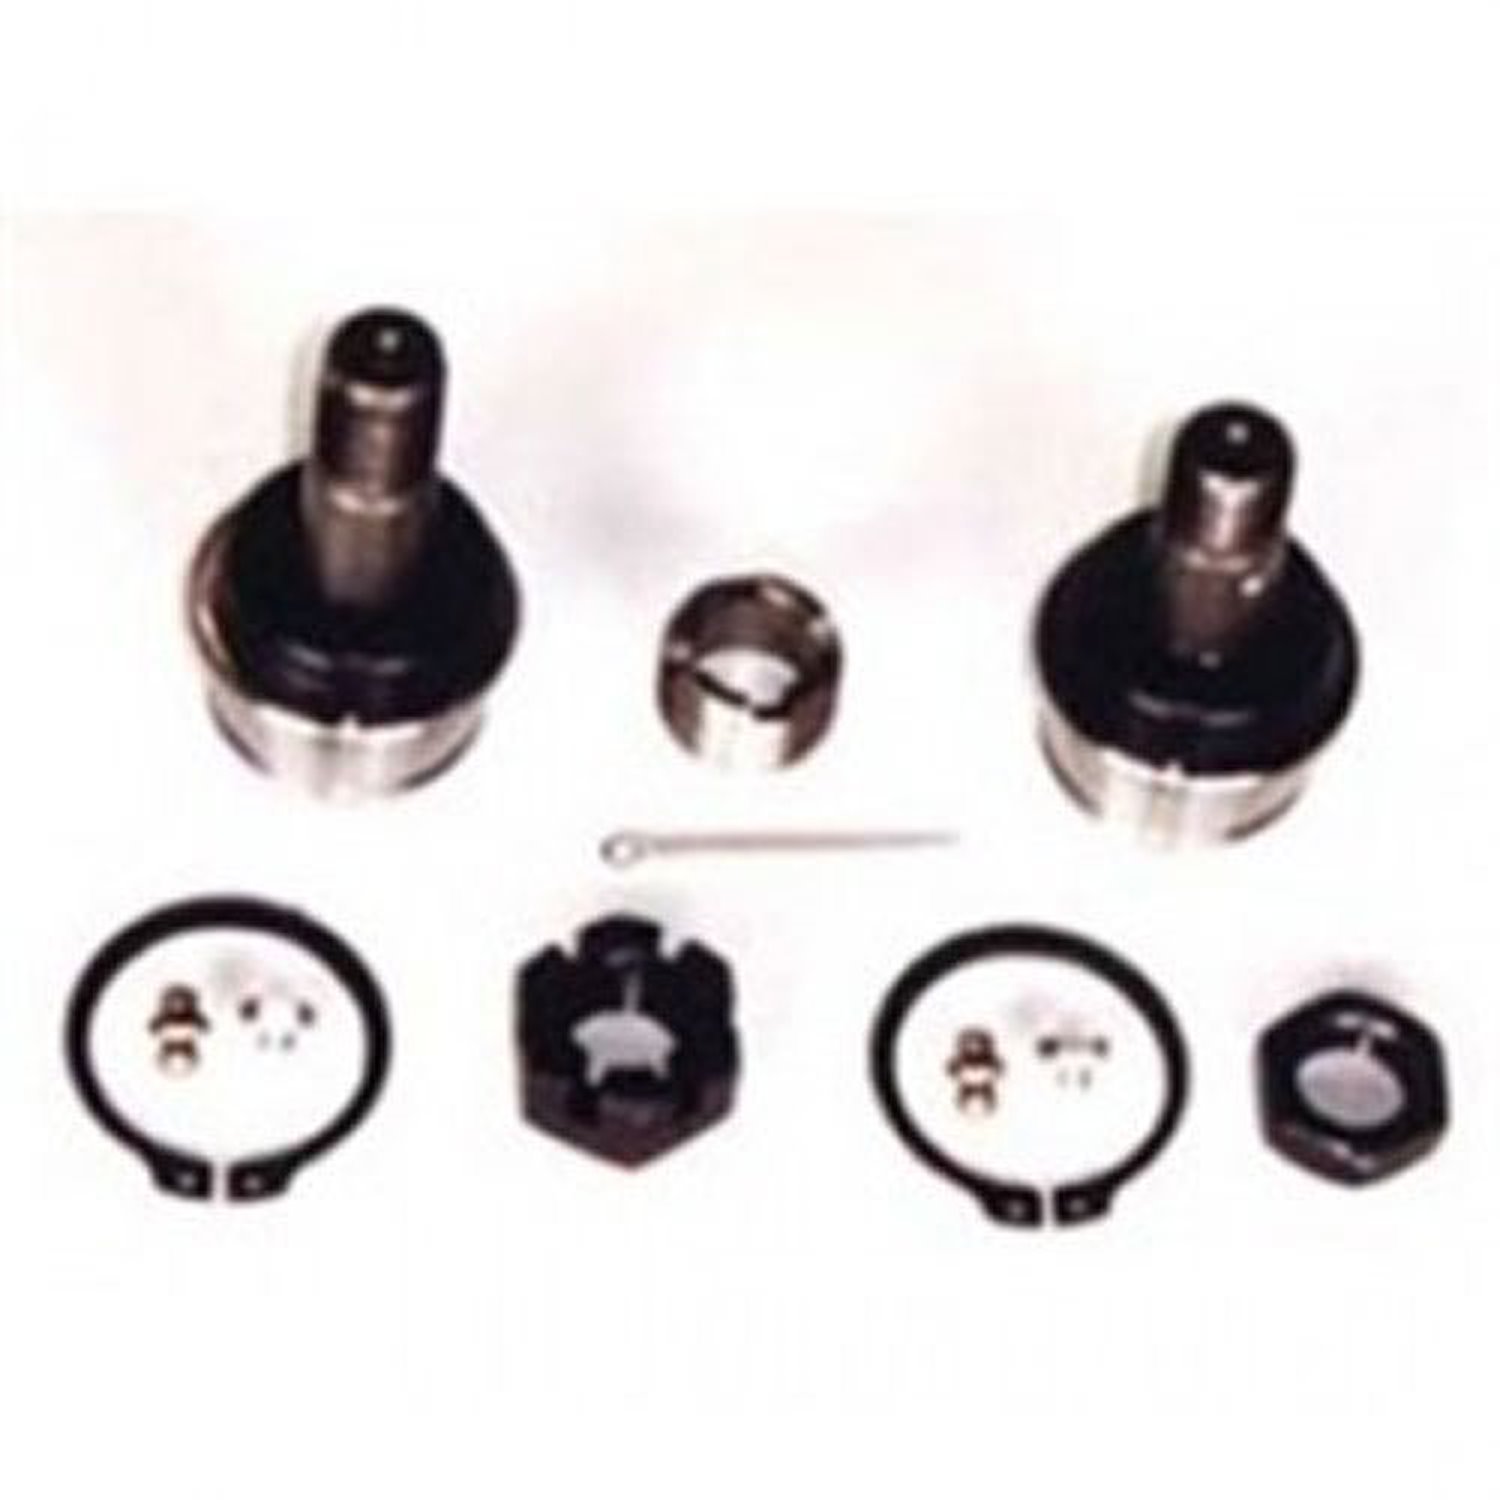 This Ball Joint kit from Omix-ADA fits 72-86